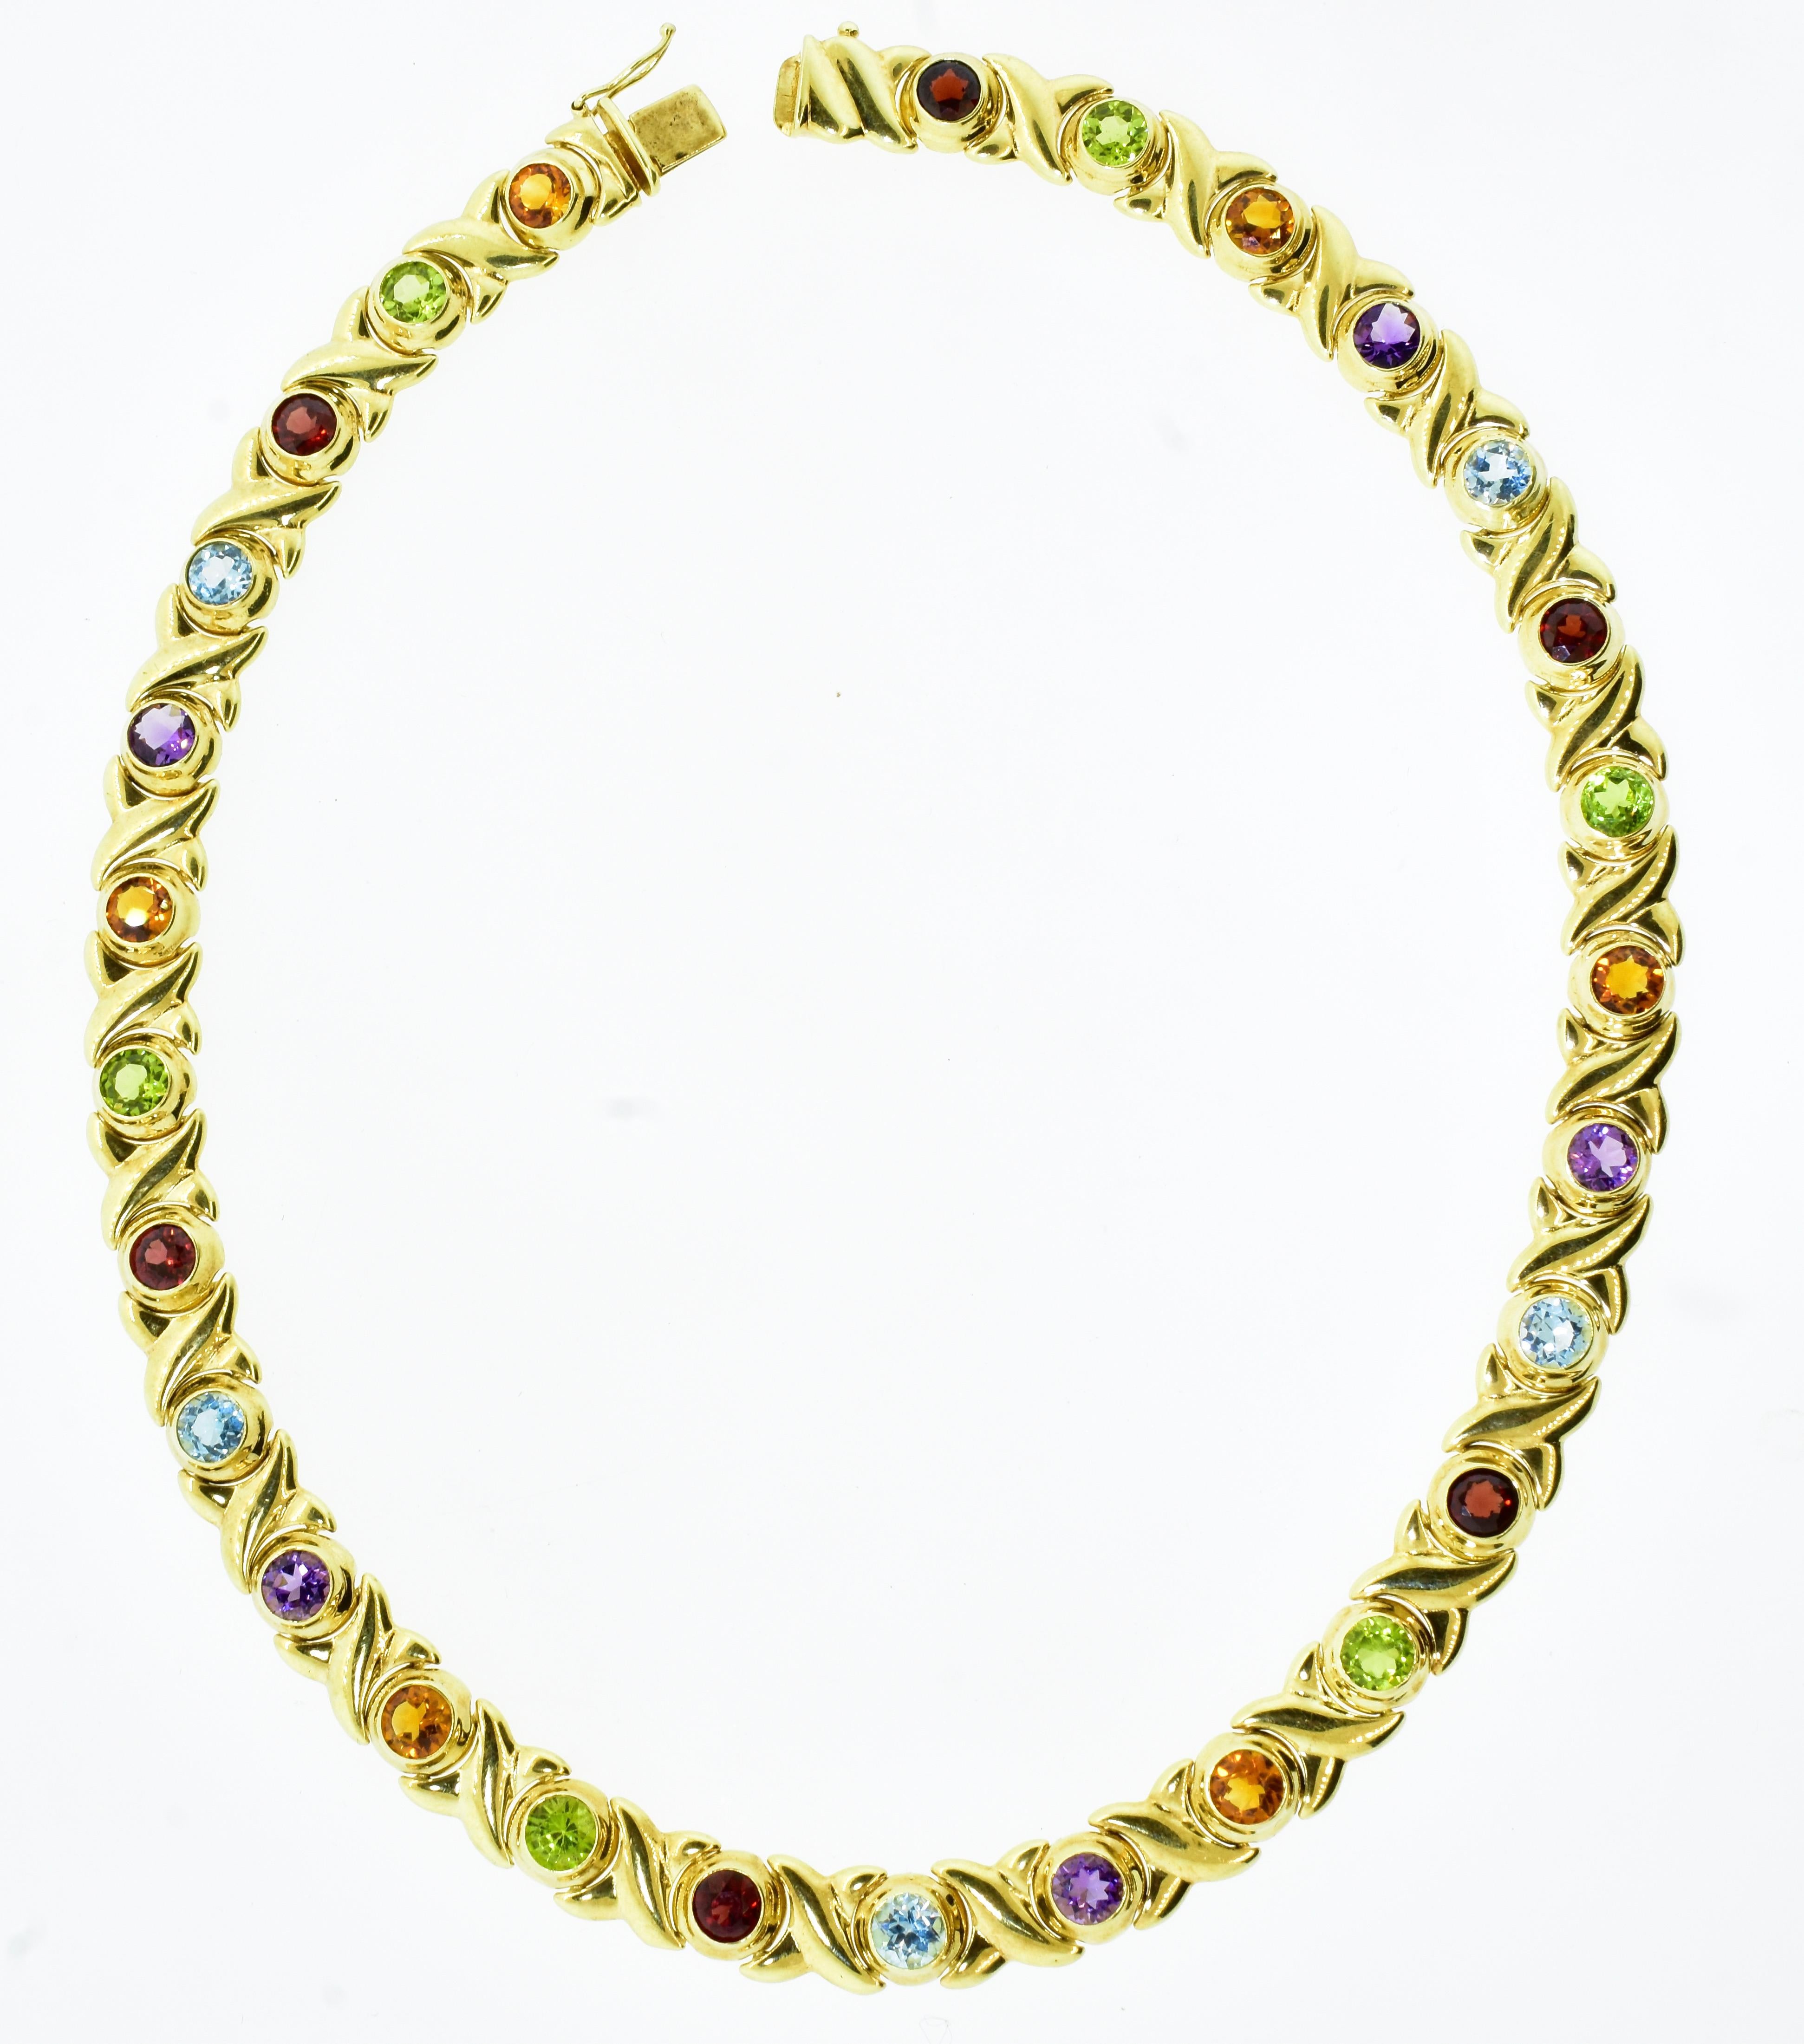 Brilliant Cut Gem Set Yellow Gold Vintage Necklace with Peridot, Amethyst, Citrine, and Garnet For Sale